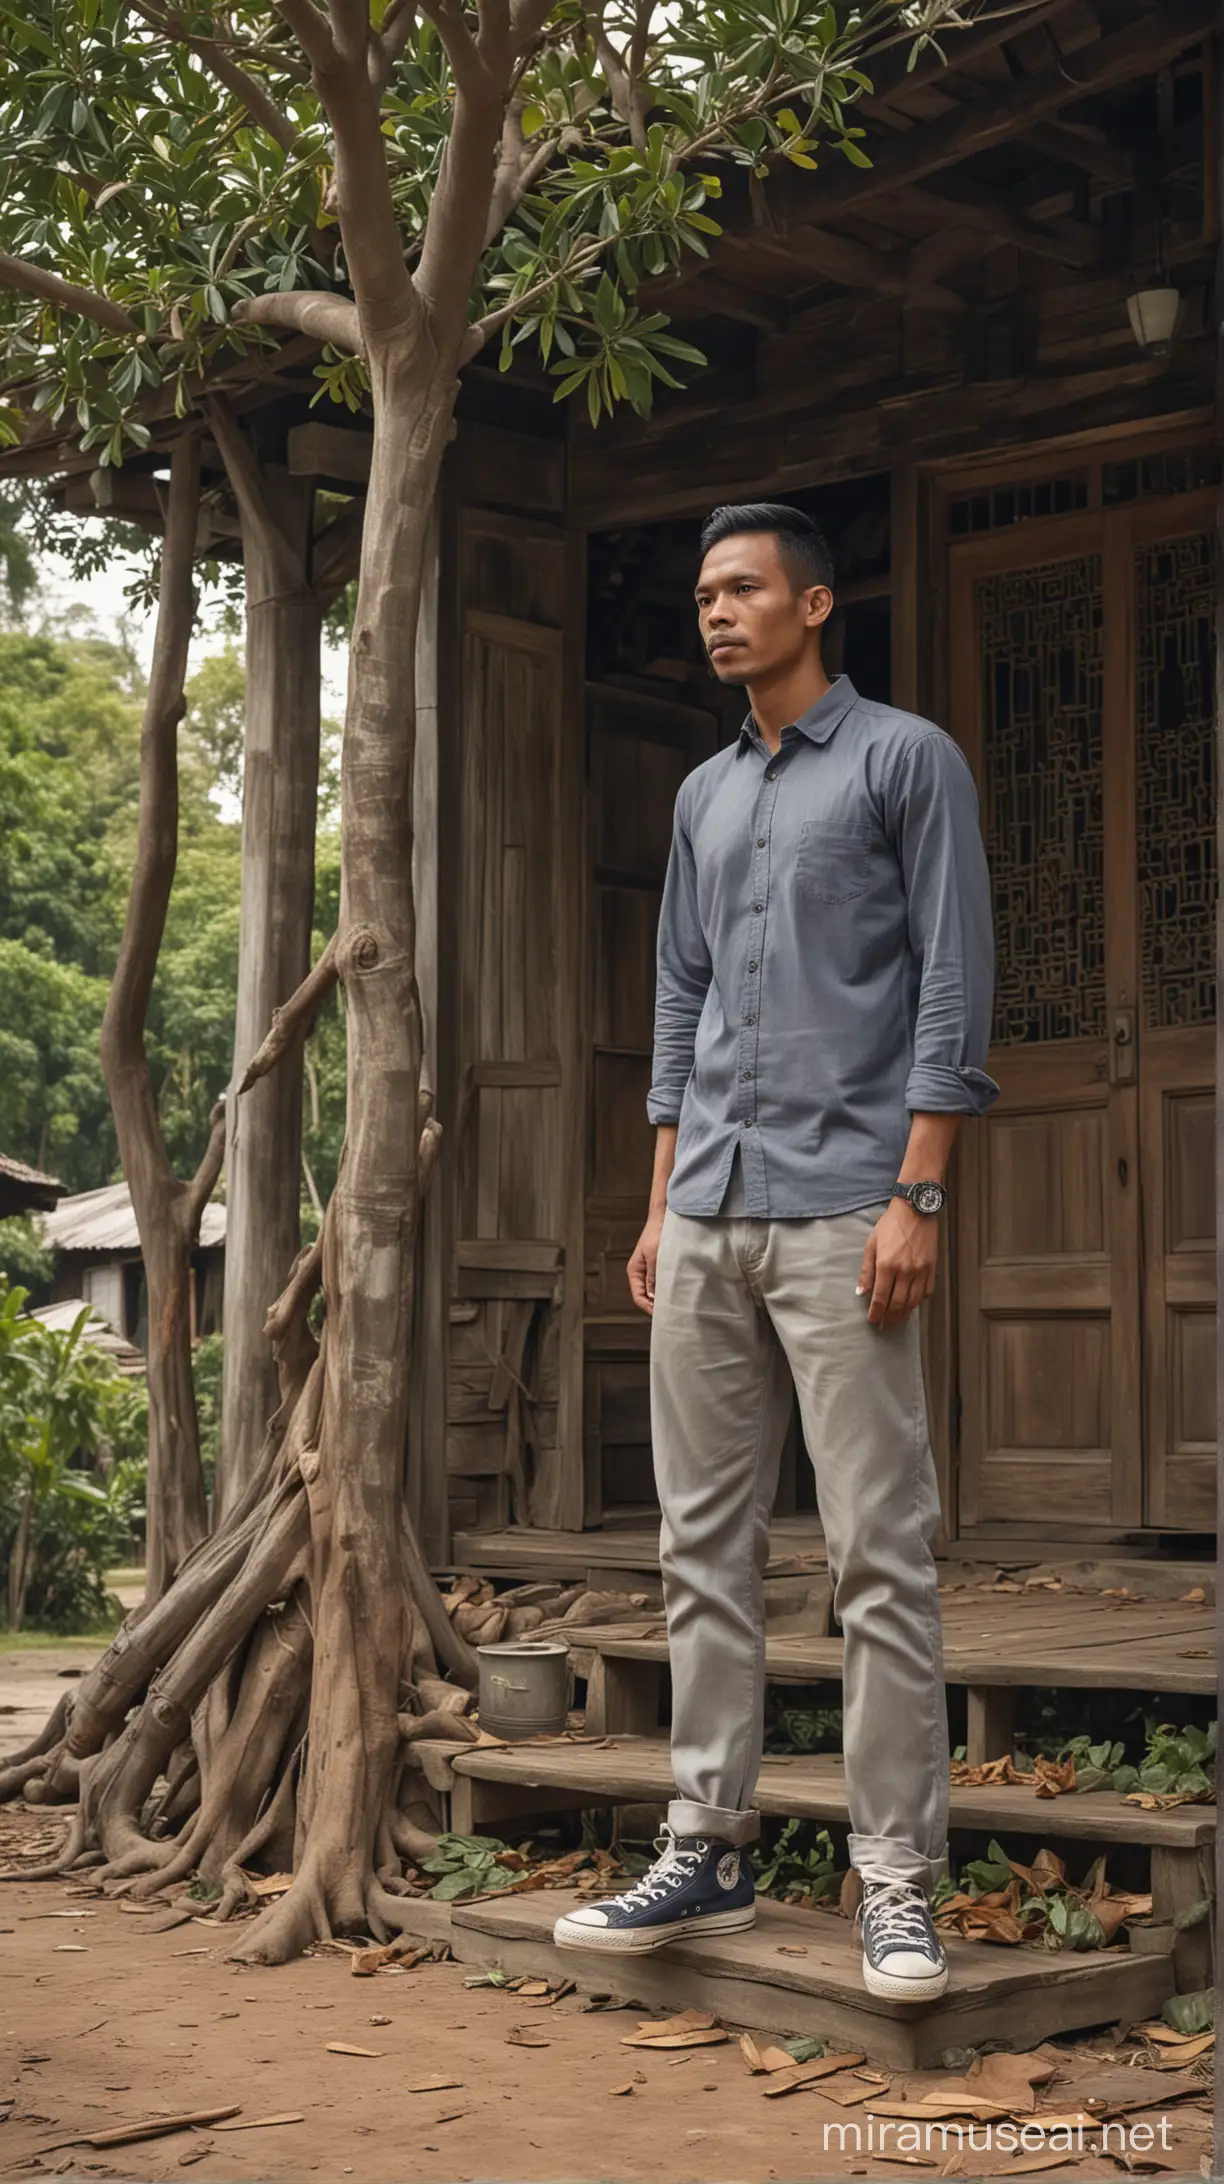 An Indonesian man wearing neat shirt and grey trouser, converse shoes, is standing in the front yard of an old wooden house with a porch connected to stairs, rusty zinc, with a Malay village atmosphere, there is a large banyan tree, there is a trophy on the table, realistic, detailed, cinematic, focused shot.